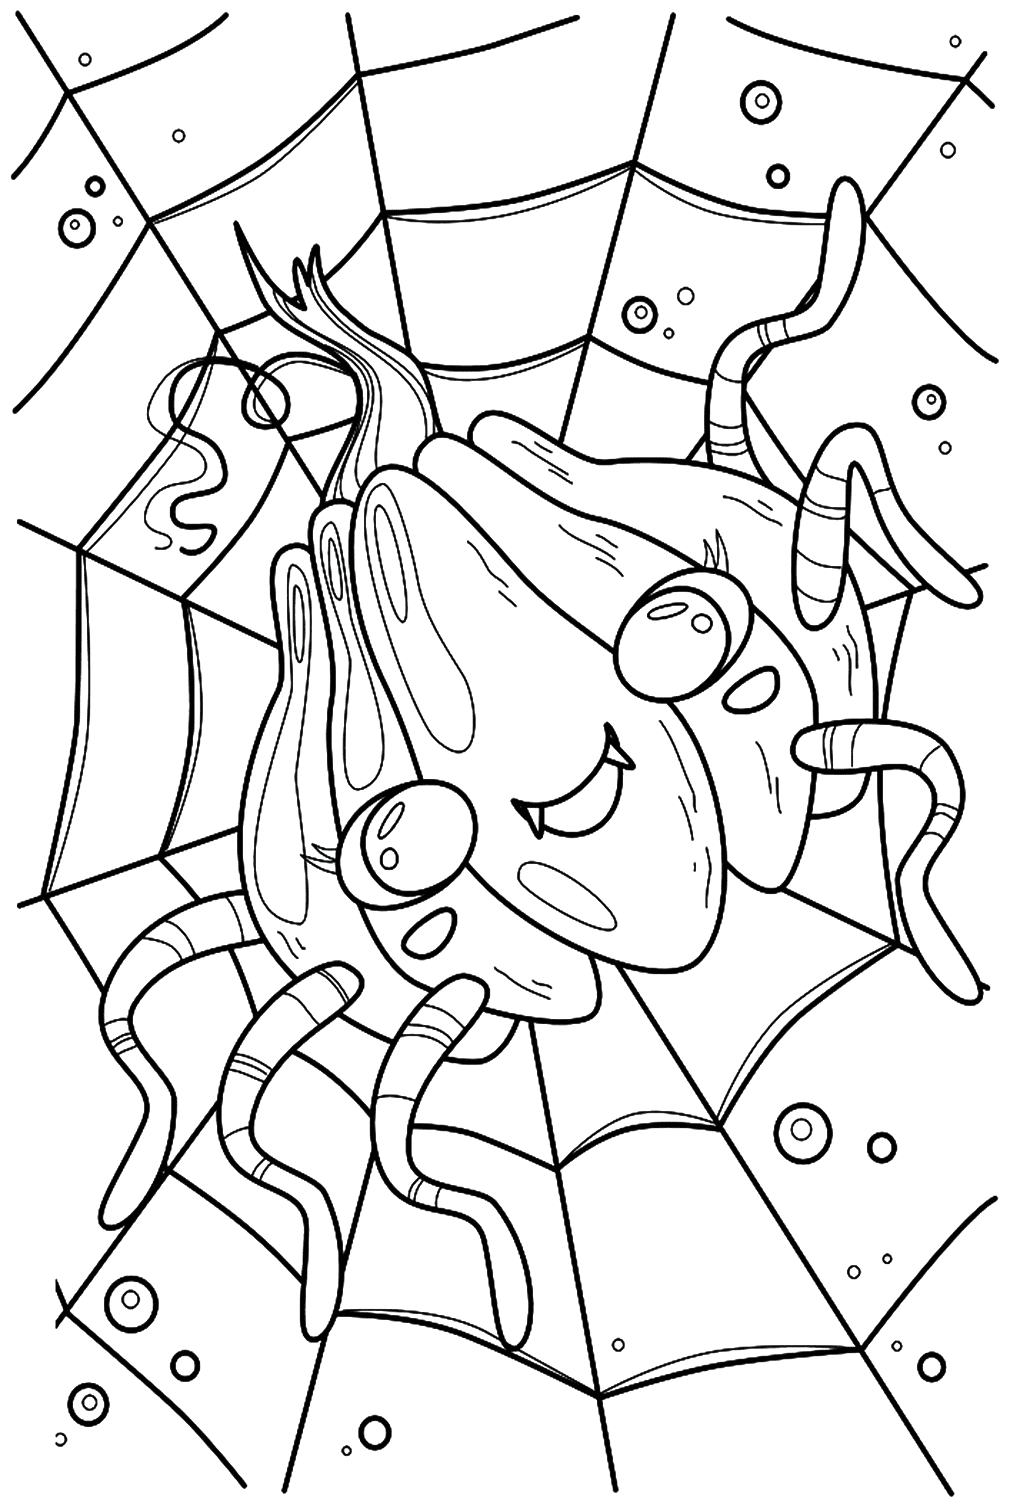 Cute Spider Pumpkin Halloween Coloring Page